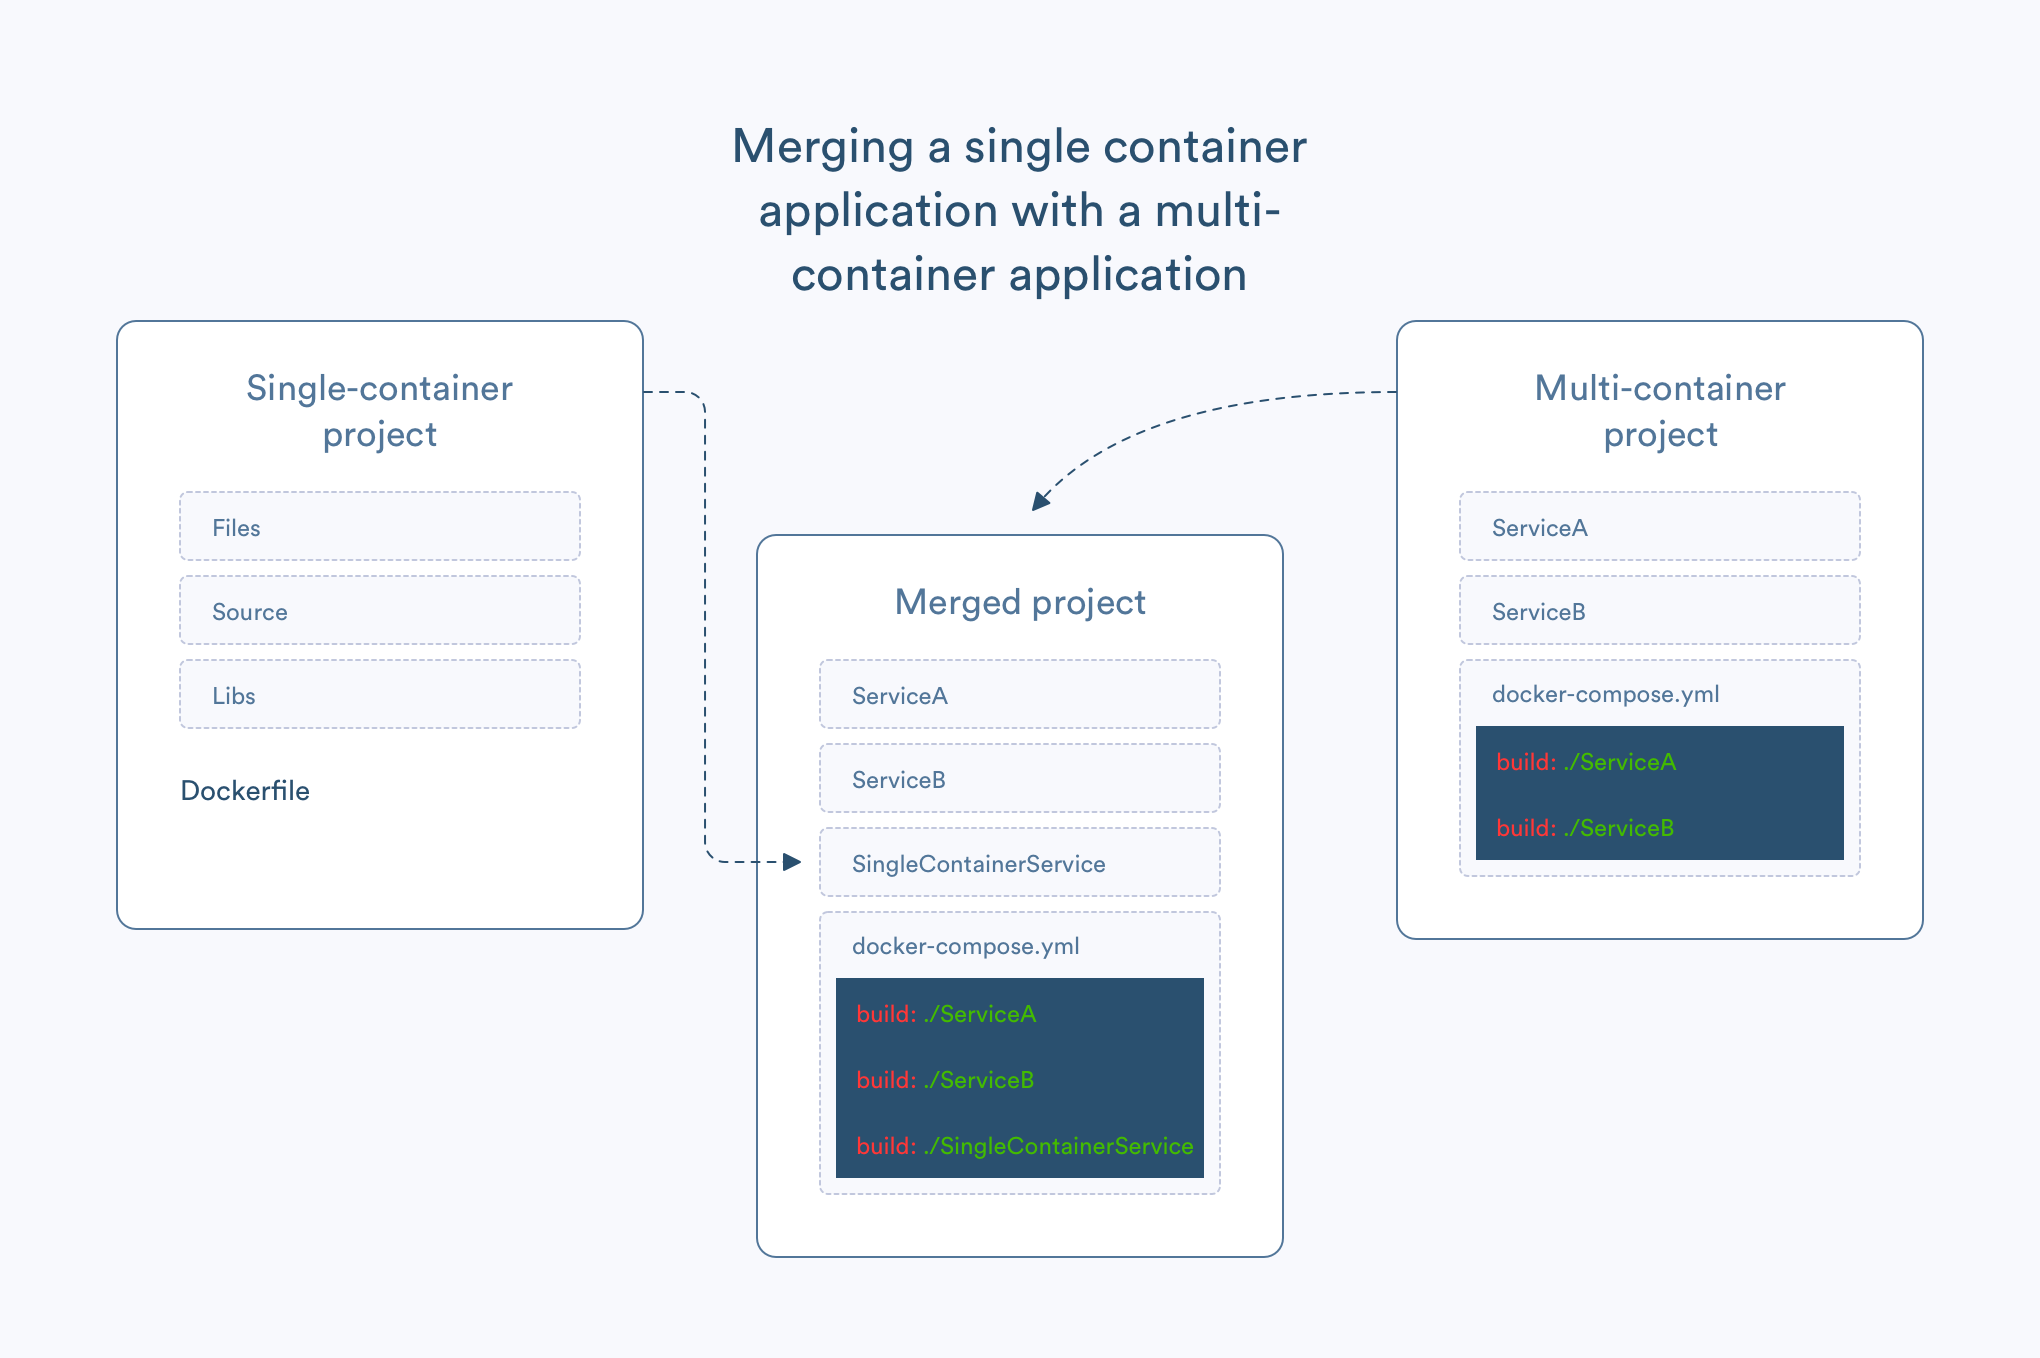 Merging a single container application with a multi-container application